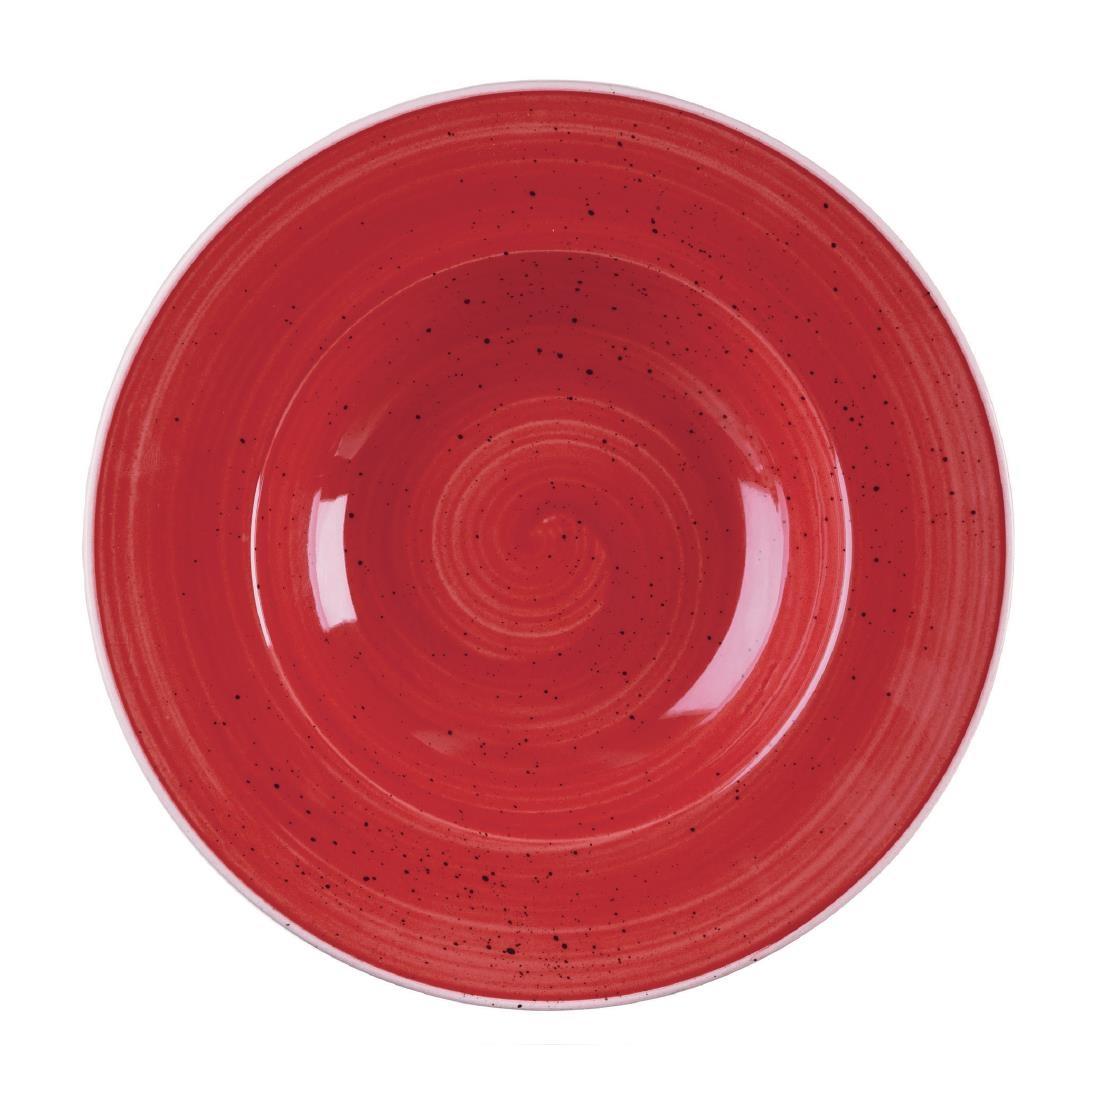 Churchill Stonecast Round Wide Rim Bowl Berry Red 280mm (Pack of 12) - DM466  - 1